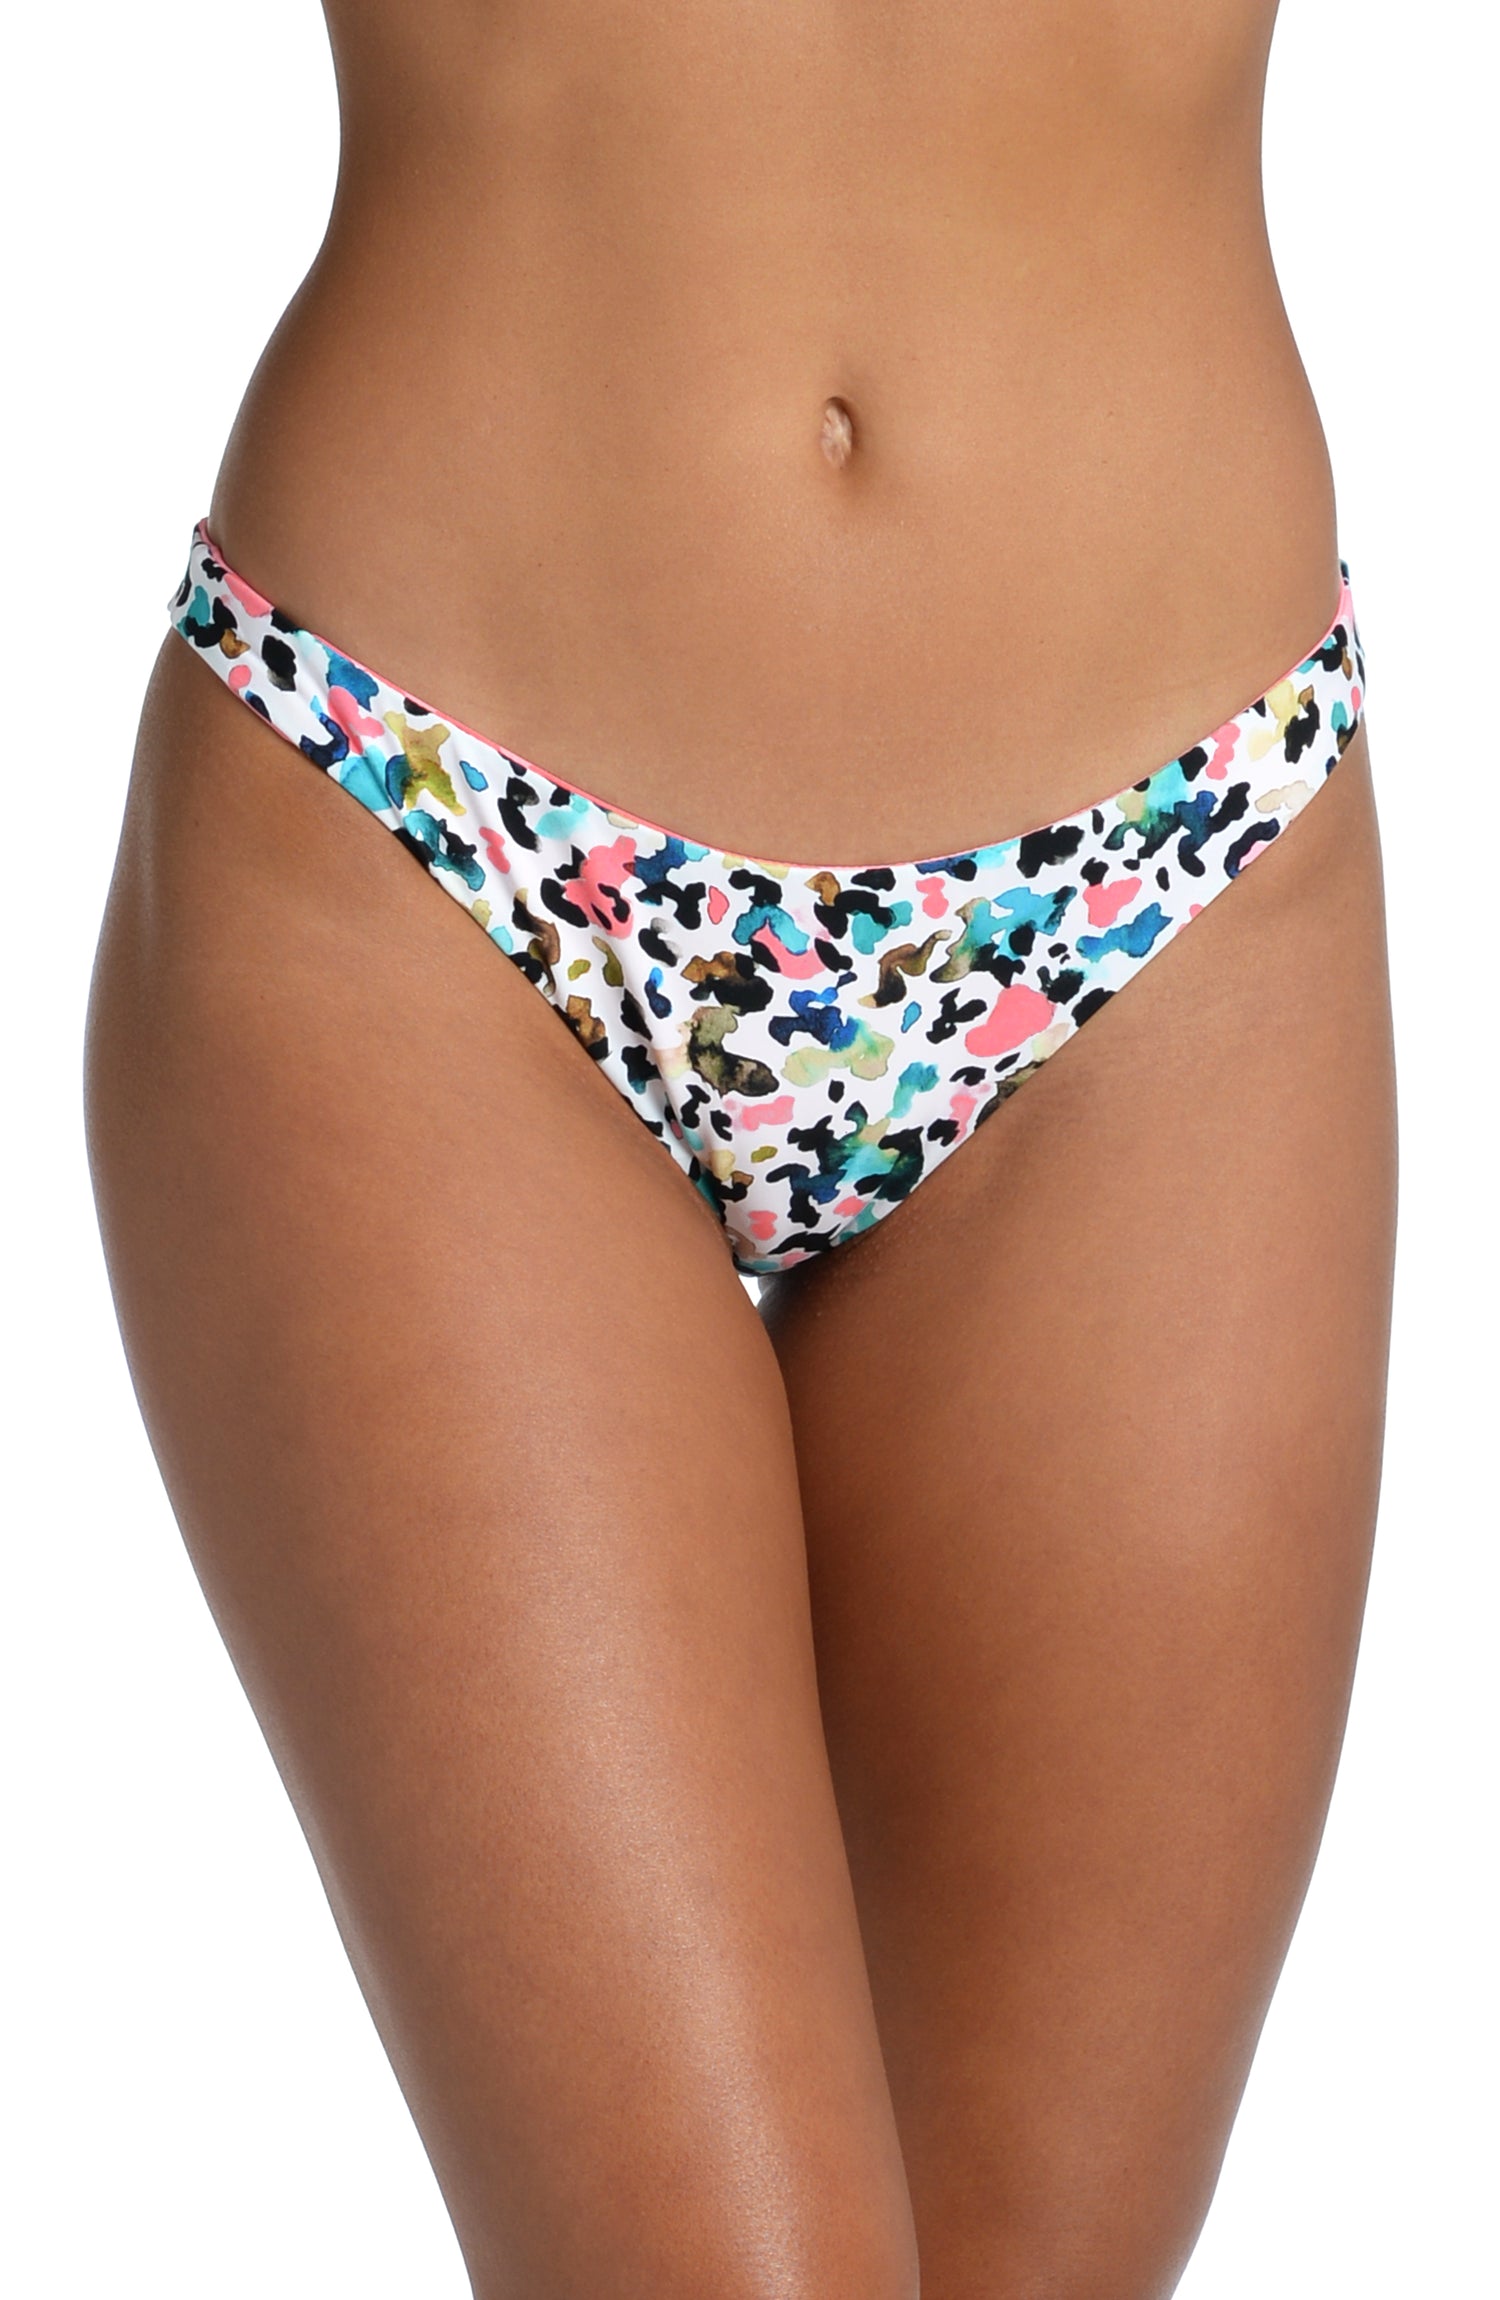 Model is wearing a multi colored confetti camouflage printed cheeky hipster bottom from our Camo Cheetah collection!